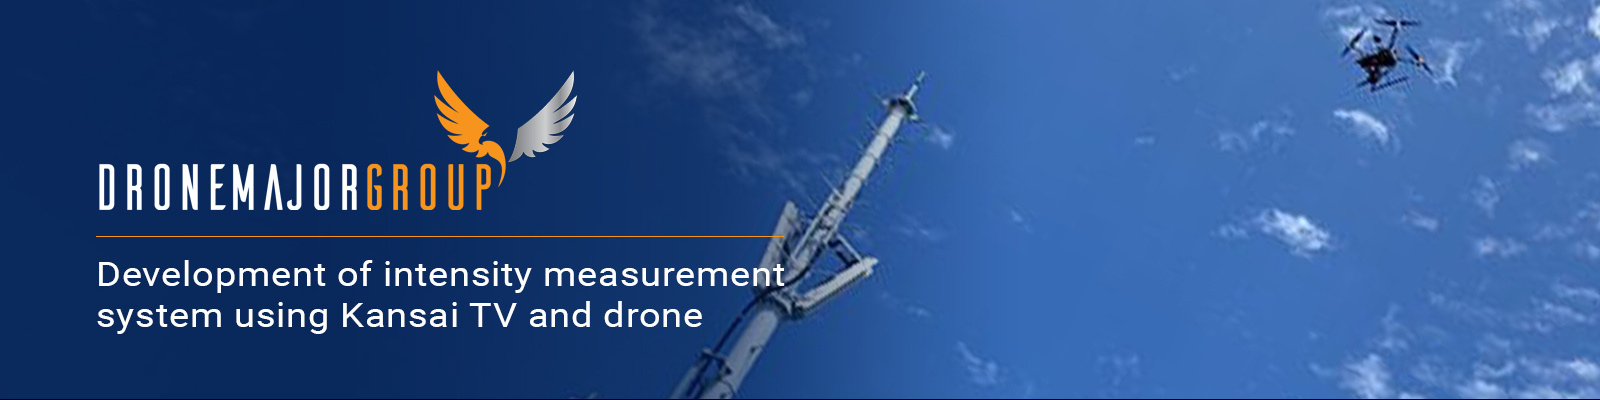 Successful development of an intensity measurement system using Kansai TV and drone